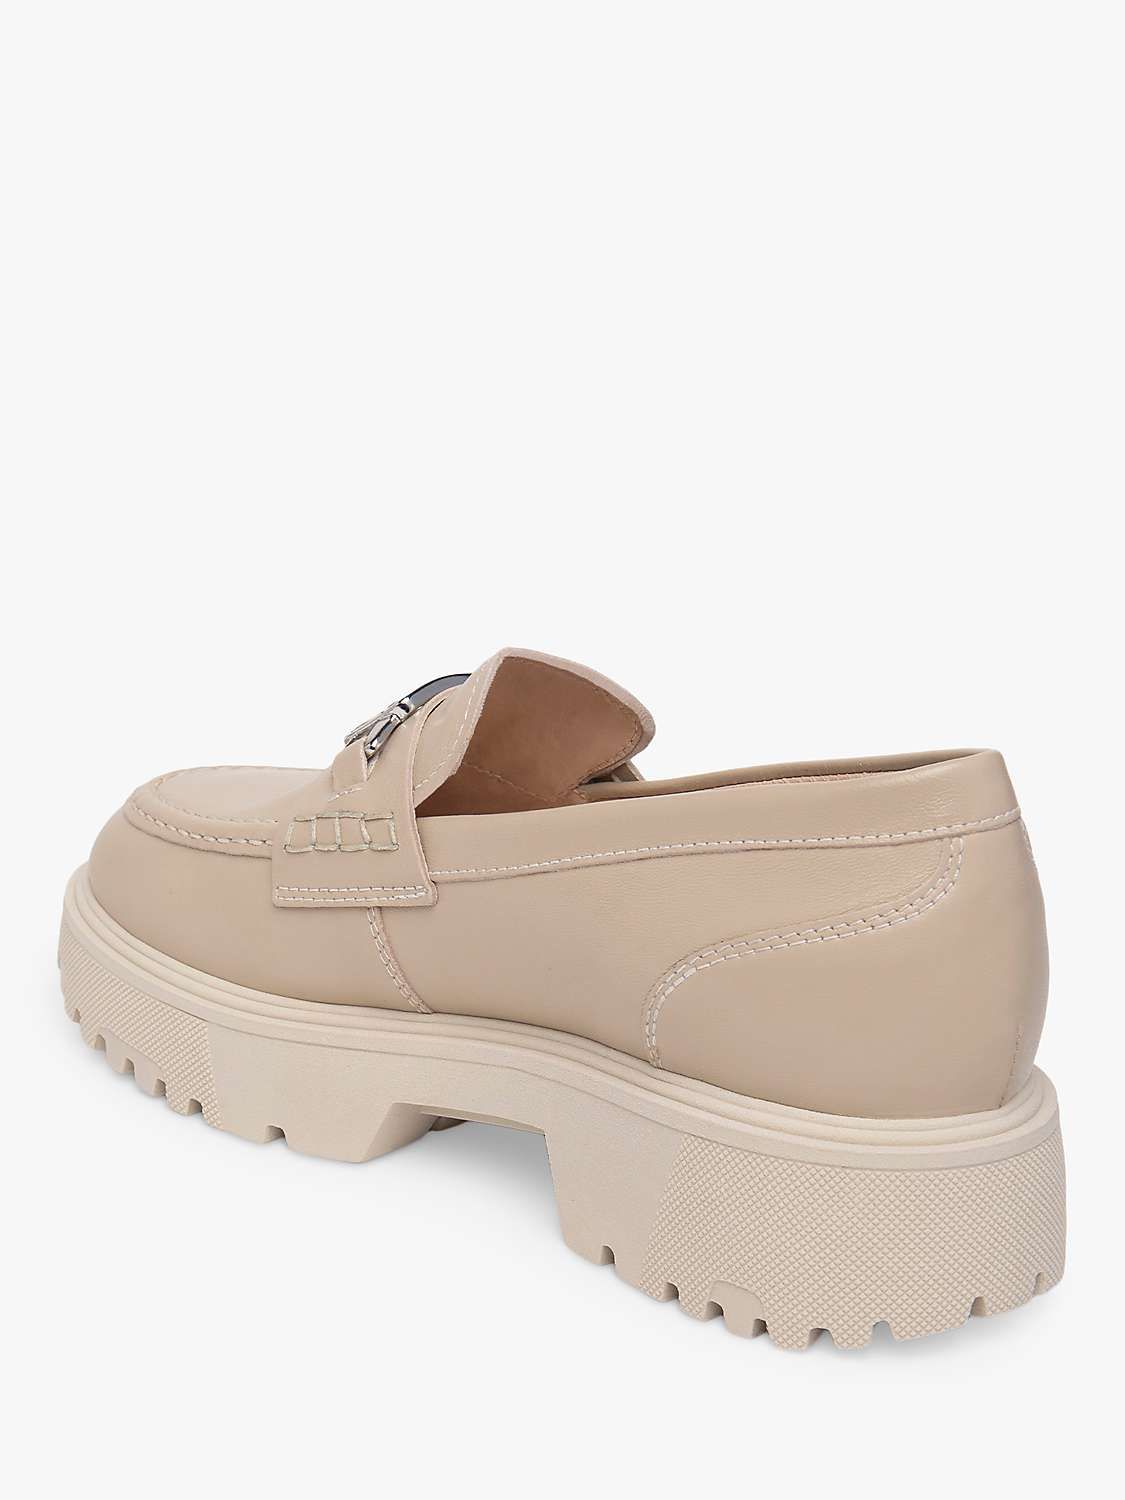 Buy NeroGiardini Leather Chunky Loafers Online at johnlewis.com